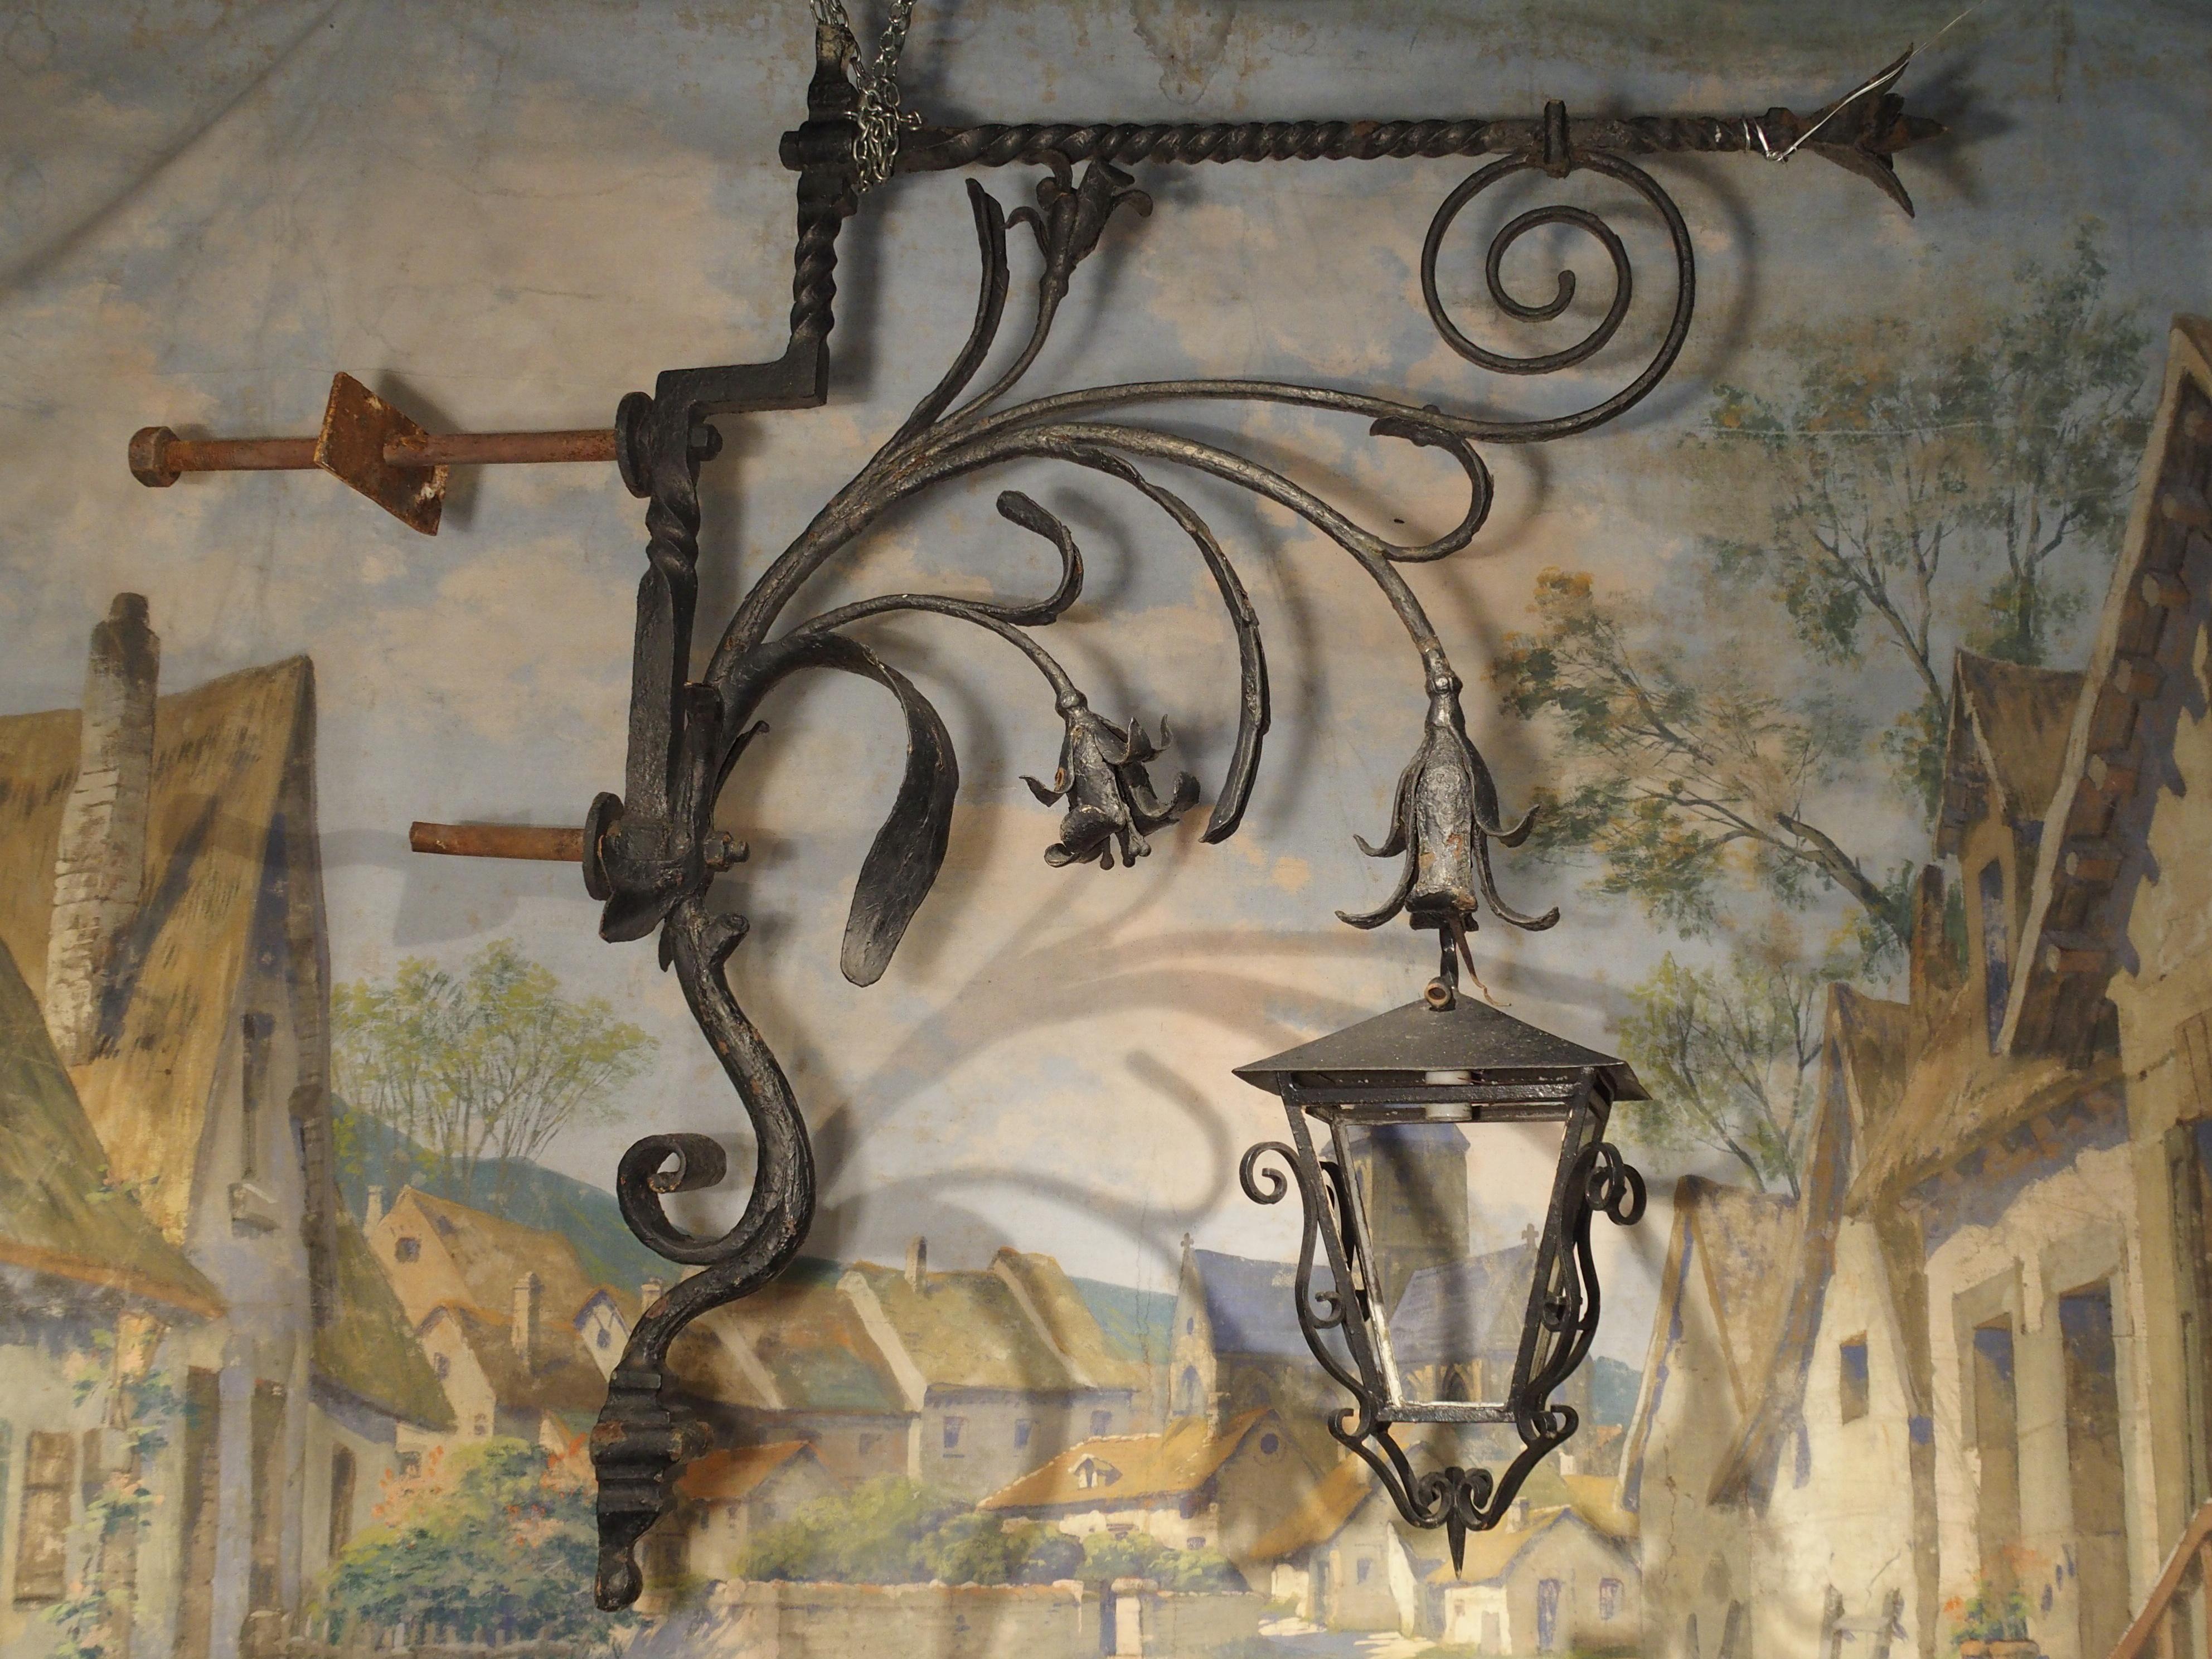 This stunning hand-forged, painted iron lantern holder dates to circa early 18th century and was once mounted to a Castle in the Wallonia region of Belgium. The height is over 6.5 feet and, including bolts, it is roughly 90 inches long (7.5 feet)!